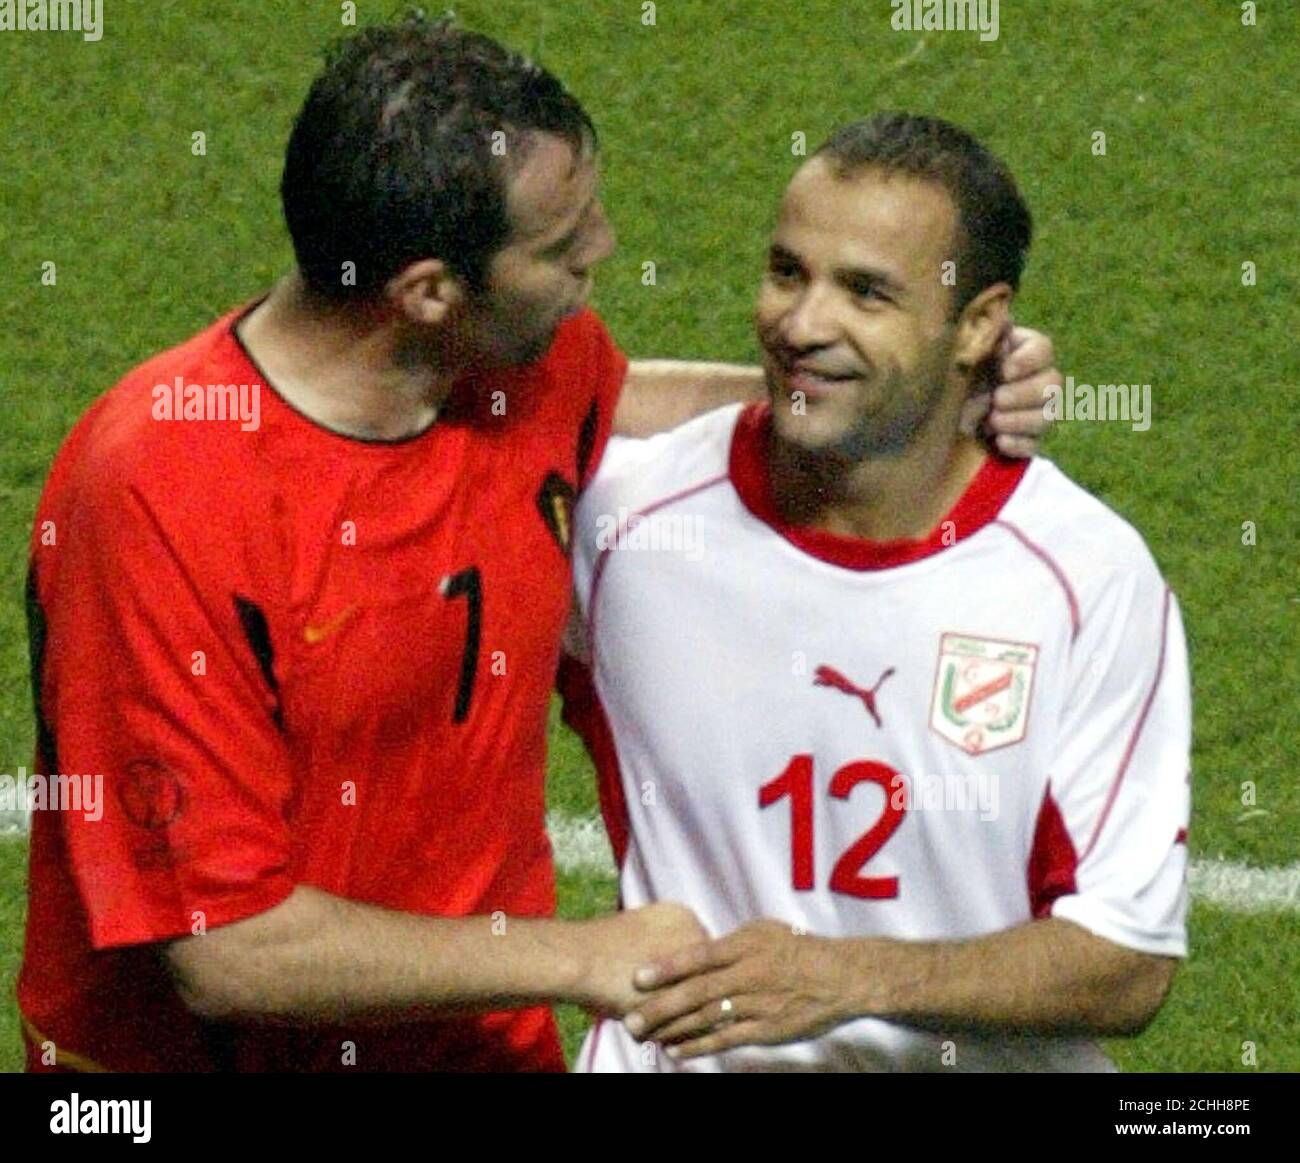 Belgium's captain Marc Wilmots (L) congratulates Tunisia's Raouf Bouzaiene (R) following their World Cup Finals group H soccer match at Oita's Big Eye stadium June 10, 2002. Wilmots and Bouzaiene were the goal scorers in the 1-1 draw. REUTERS/Jim Bourg  JB/GB Stock Photo